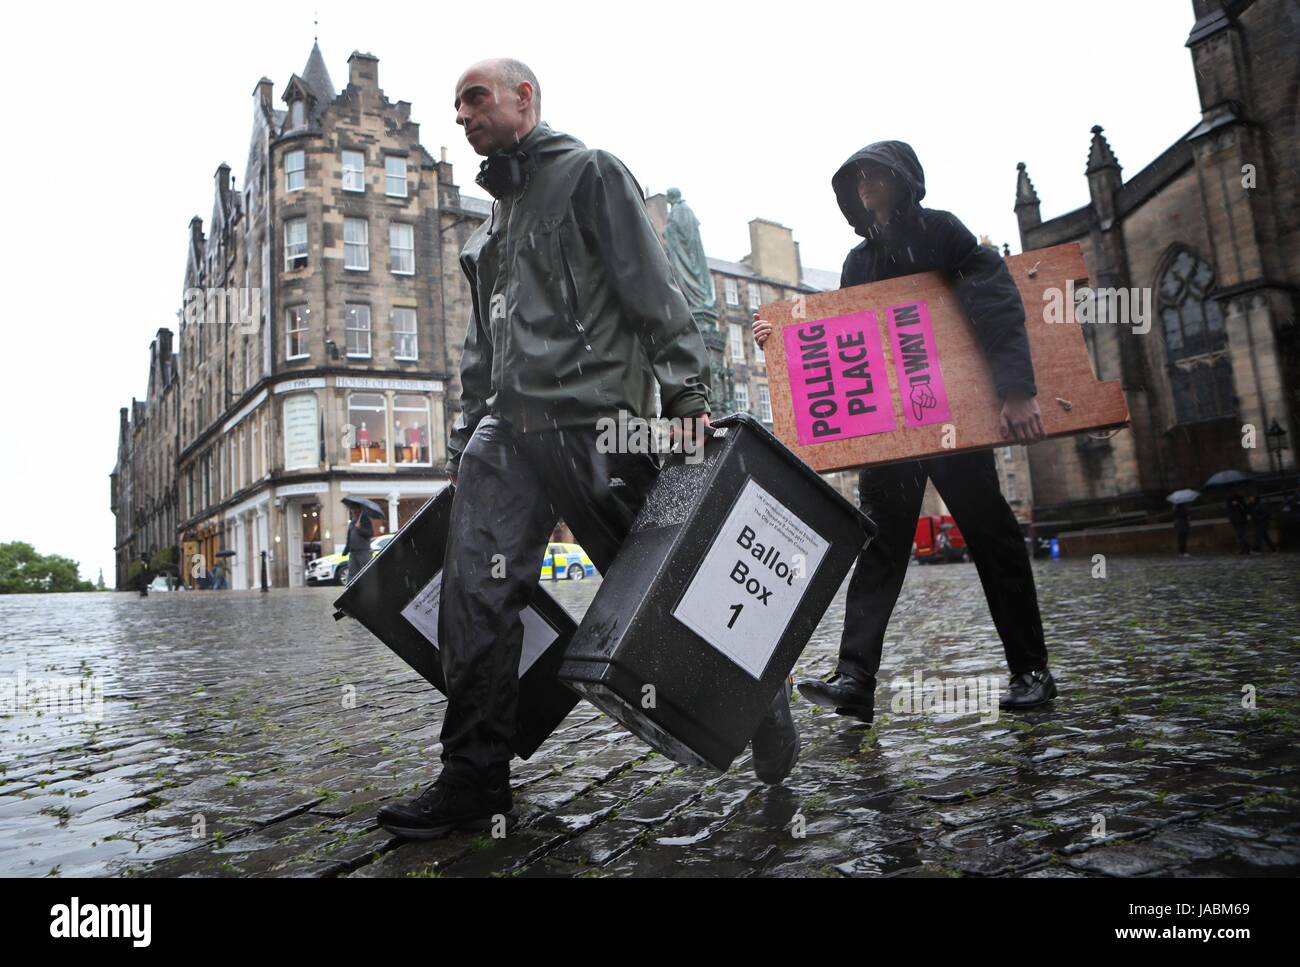 Election staff from City of Edinburgh Council deliver signage and ballot boxes to a polling station ahead of Thursday's General Election at Lothian Chambers, West Parliament Square in Edinburgh. Stock Photo